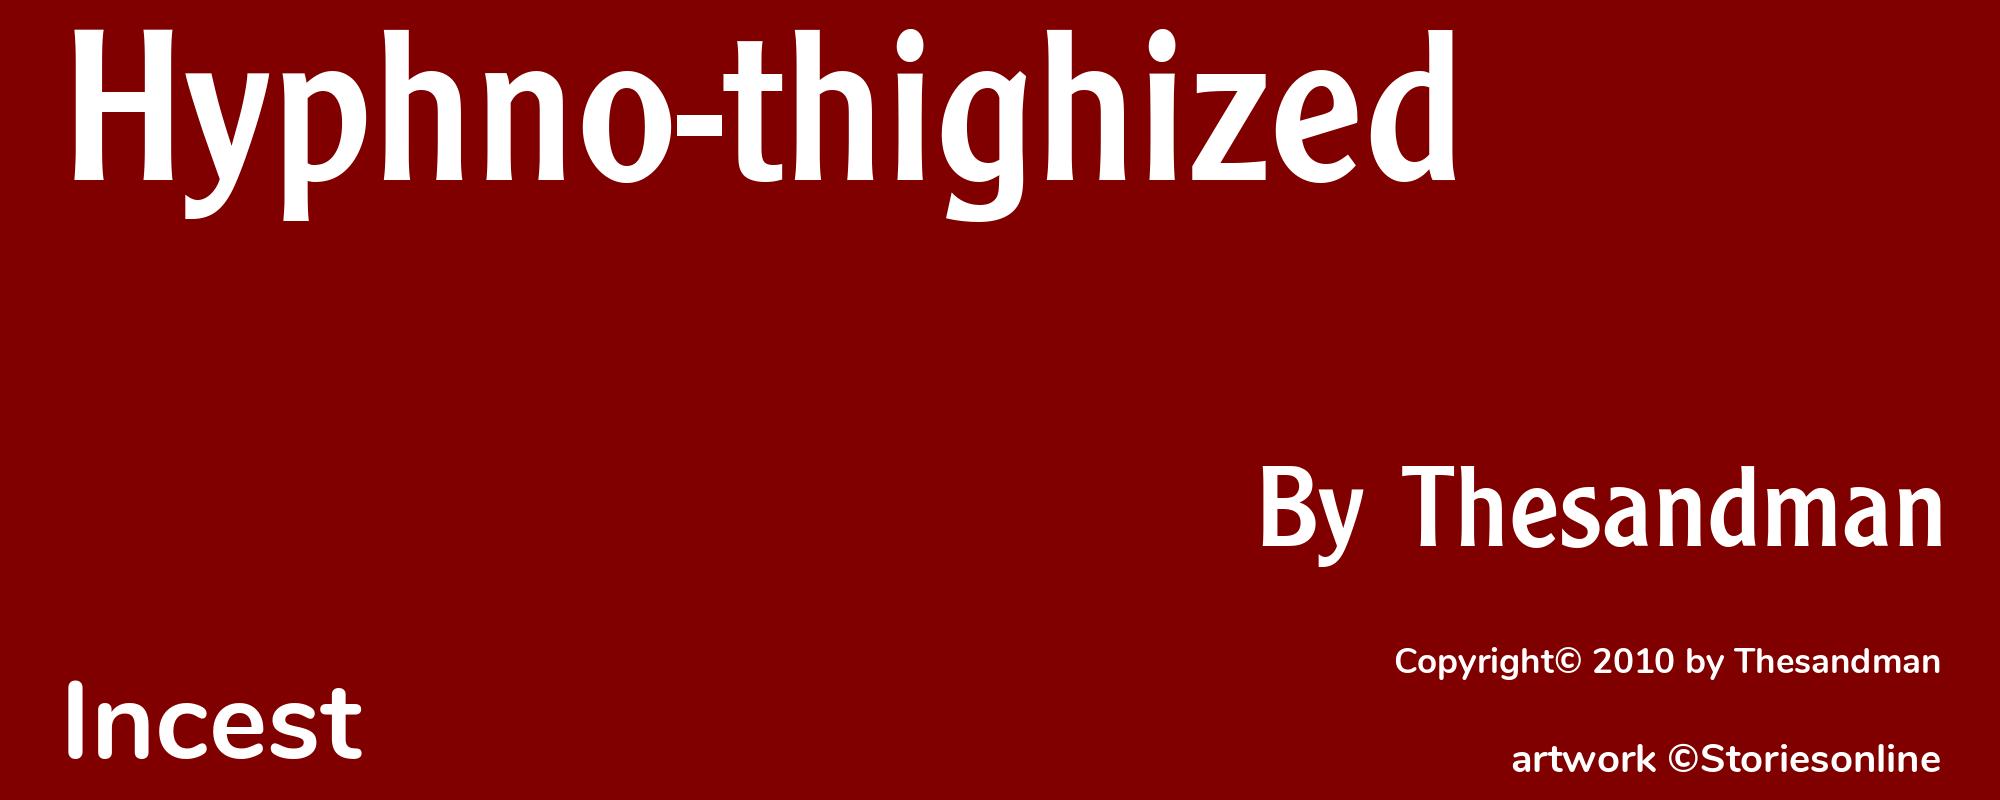 Hyphno-thighized - Cover